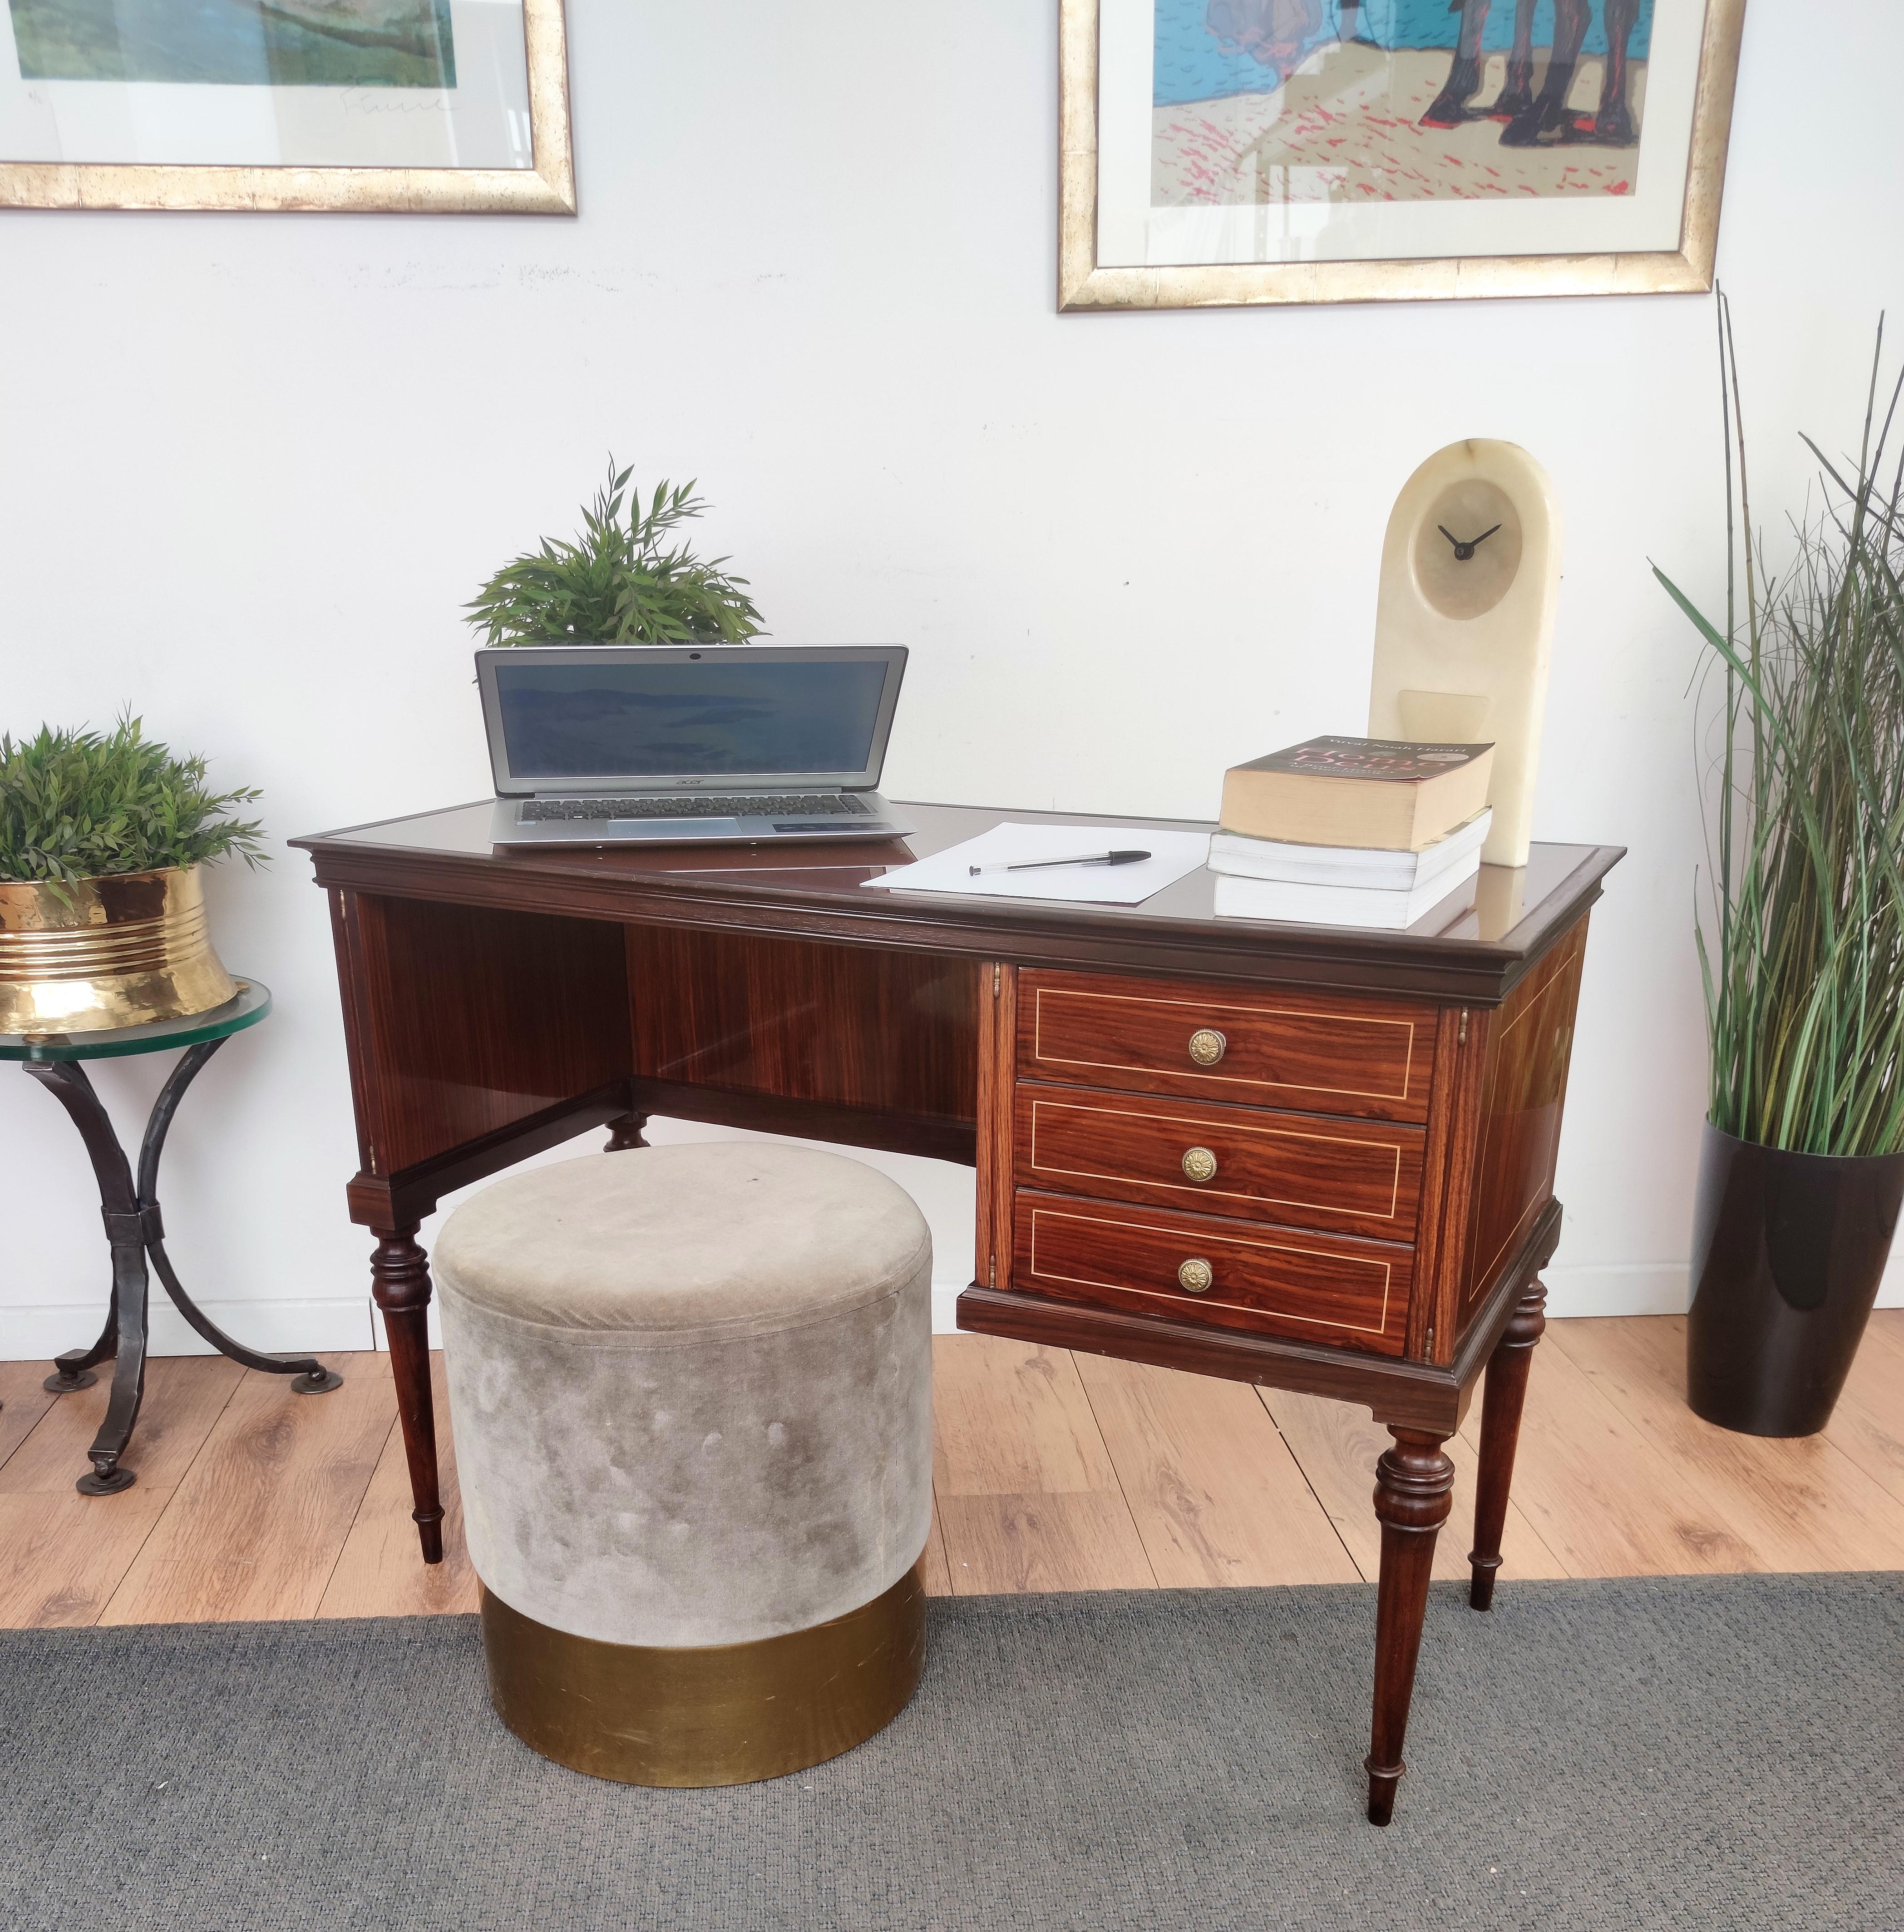 Very elegant Italian Art Deco Mid-Century Modern small desk or writing table secretaire, in beautiful decorated and veneer wood with three drawers and covered sides. This beautiful piece is completed by the bordeaux glass top, the brass drawers